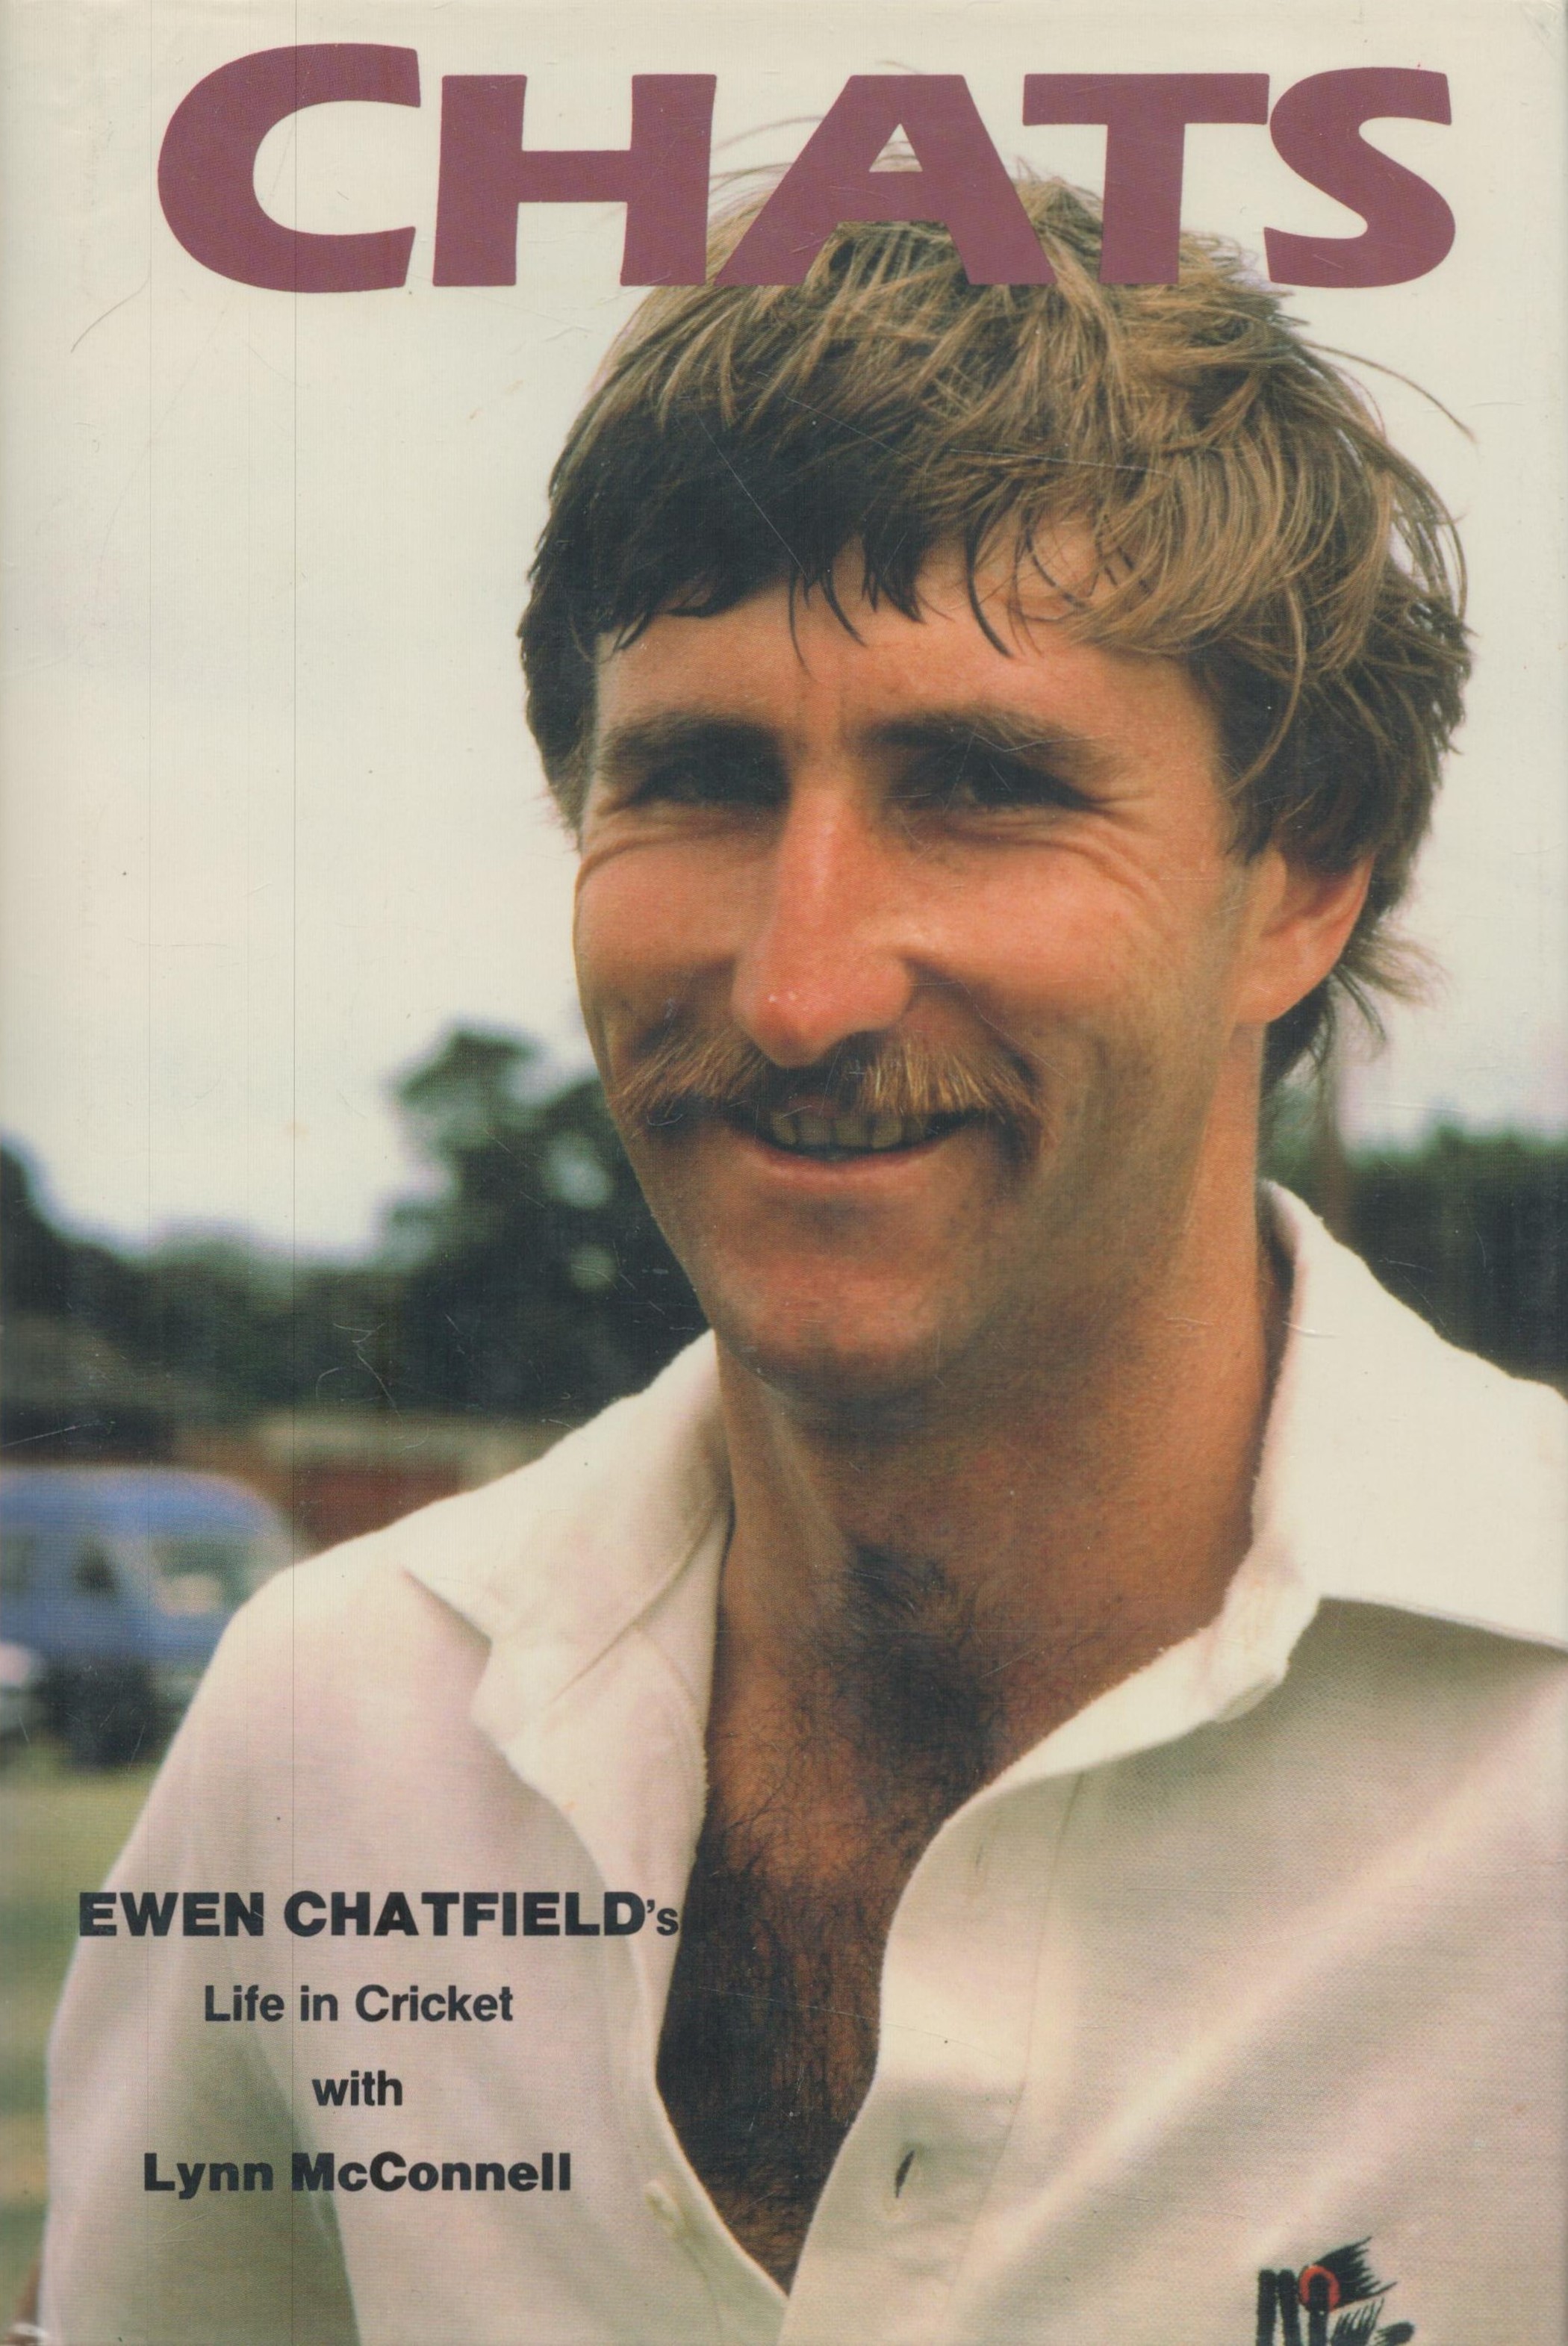 Chats by Ewen Chatfield`s Life in Cricket with Lynn McConnel hardback book. UNSIGNED. Good condition